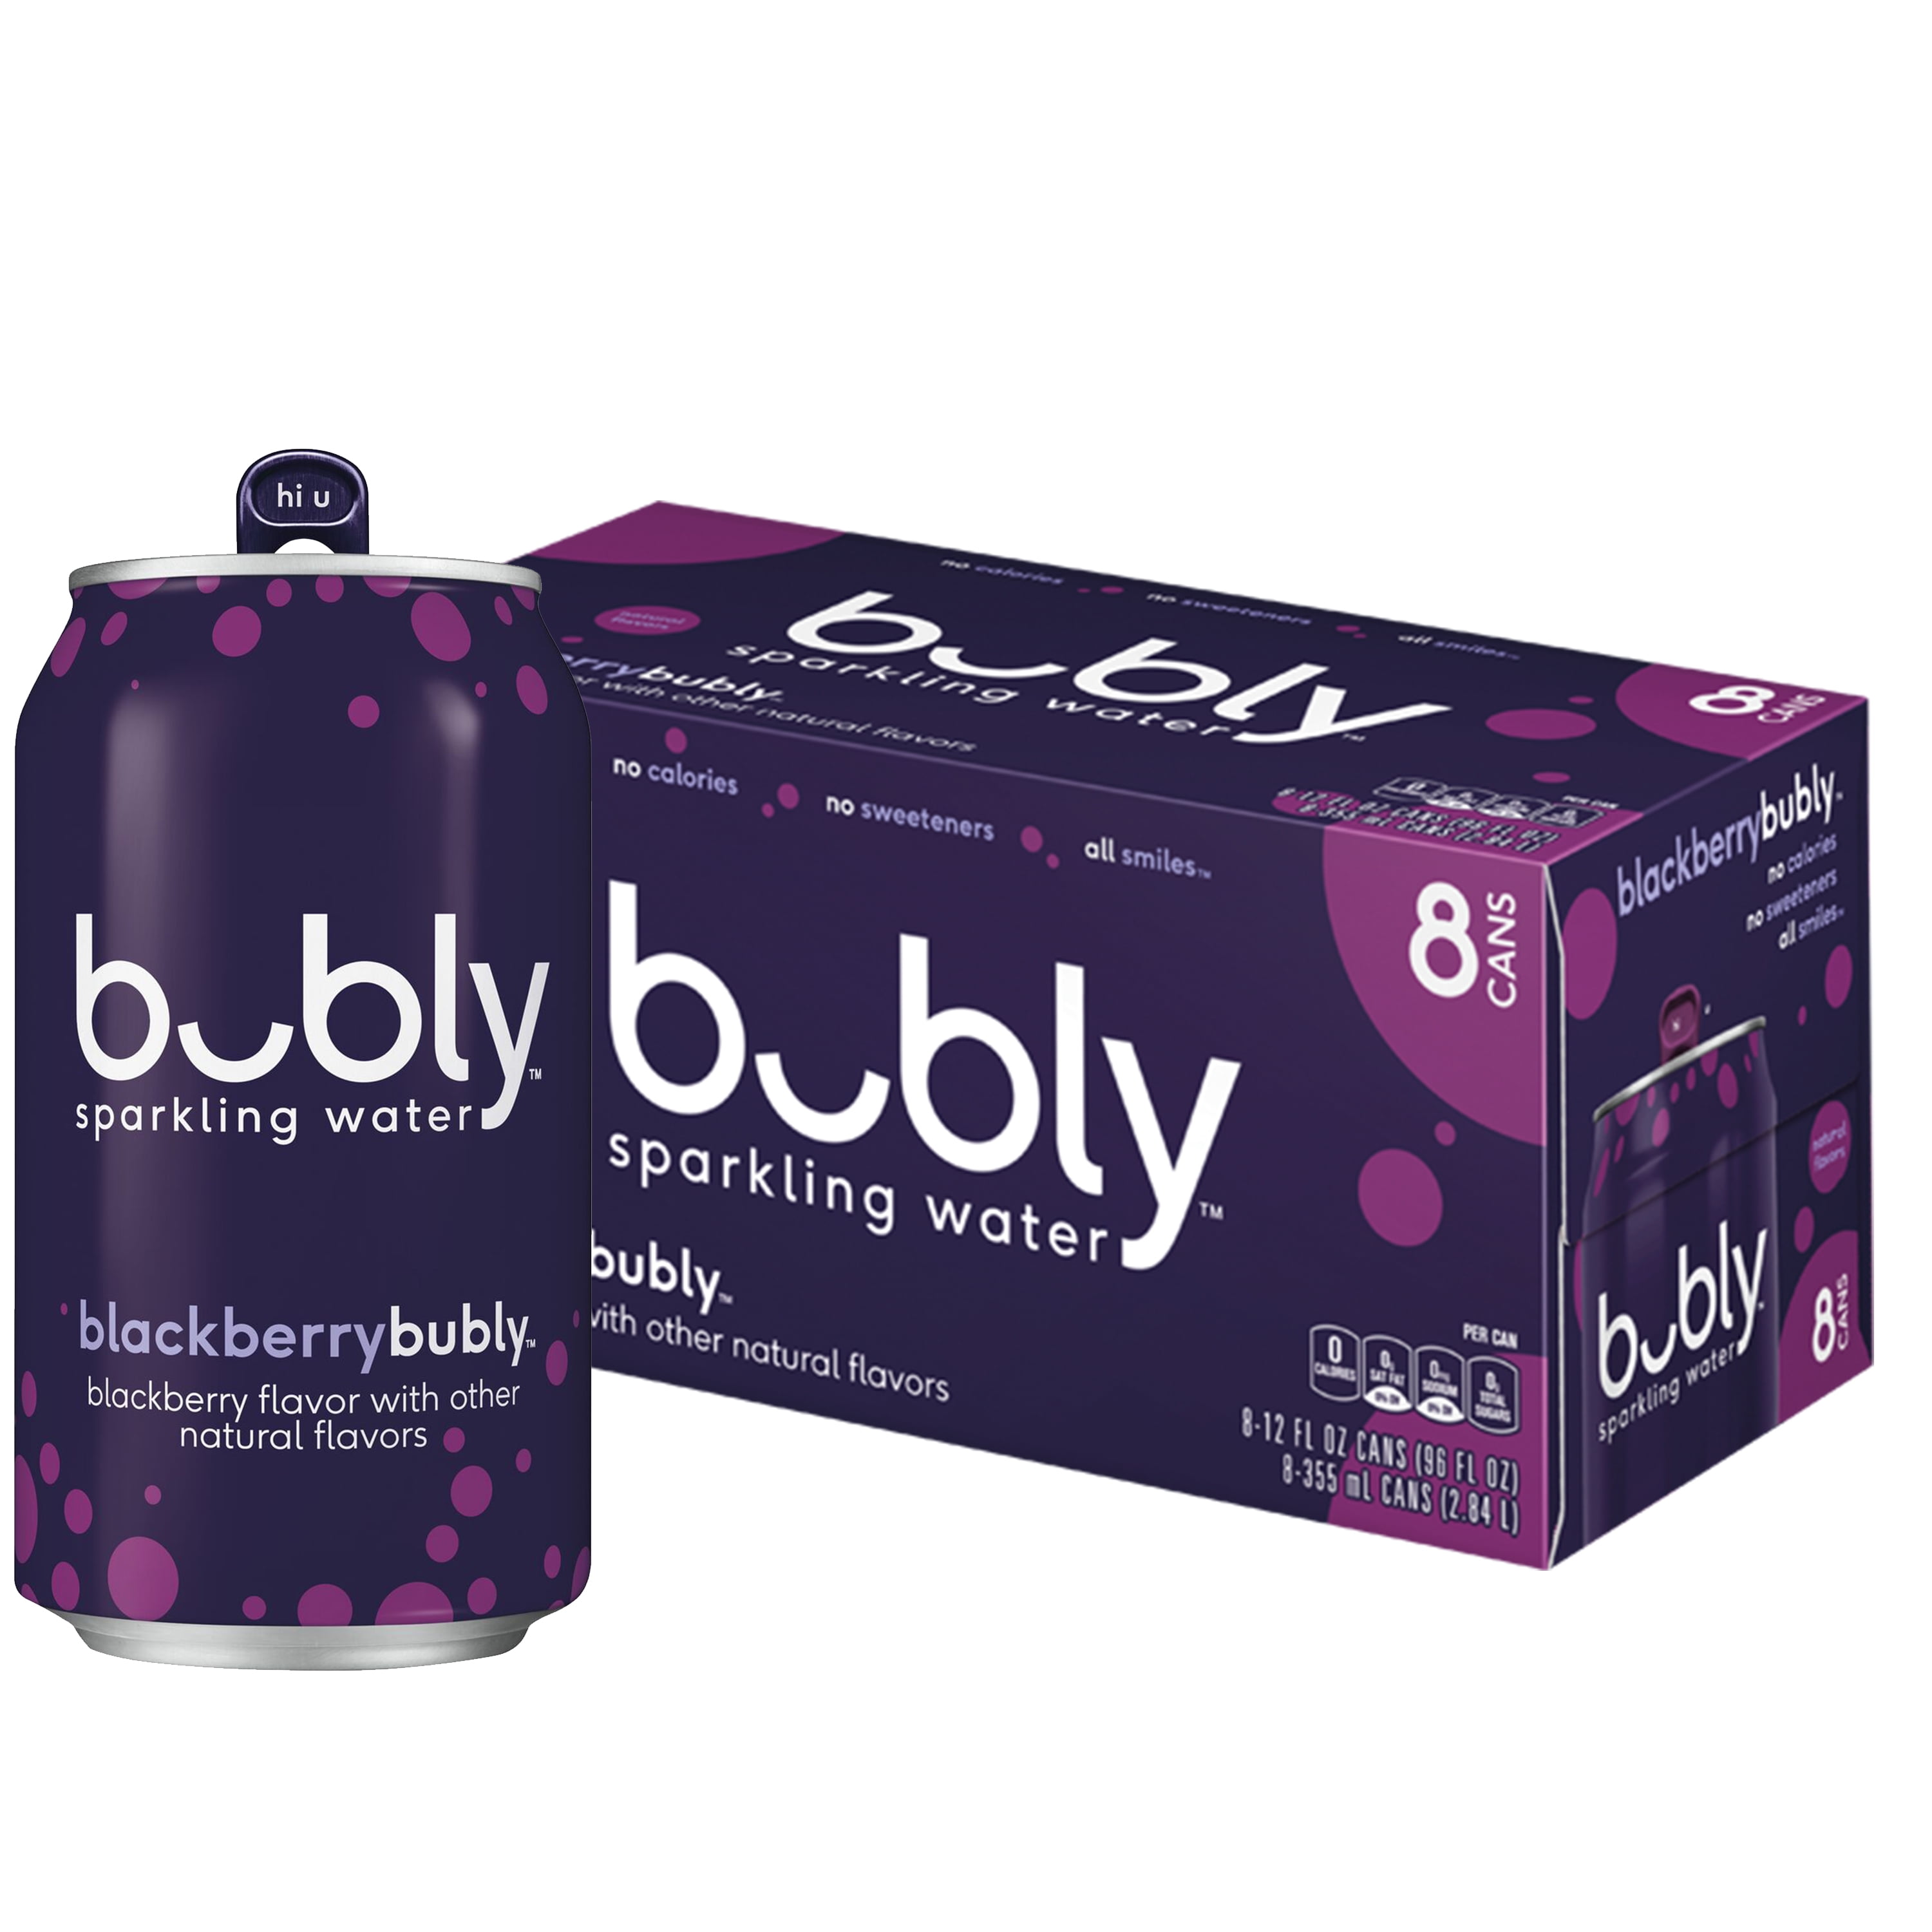 bubly Blackberry Flavored Sparkling Water, 12 oz, 8 Pack Cans